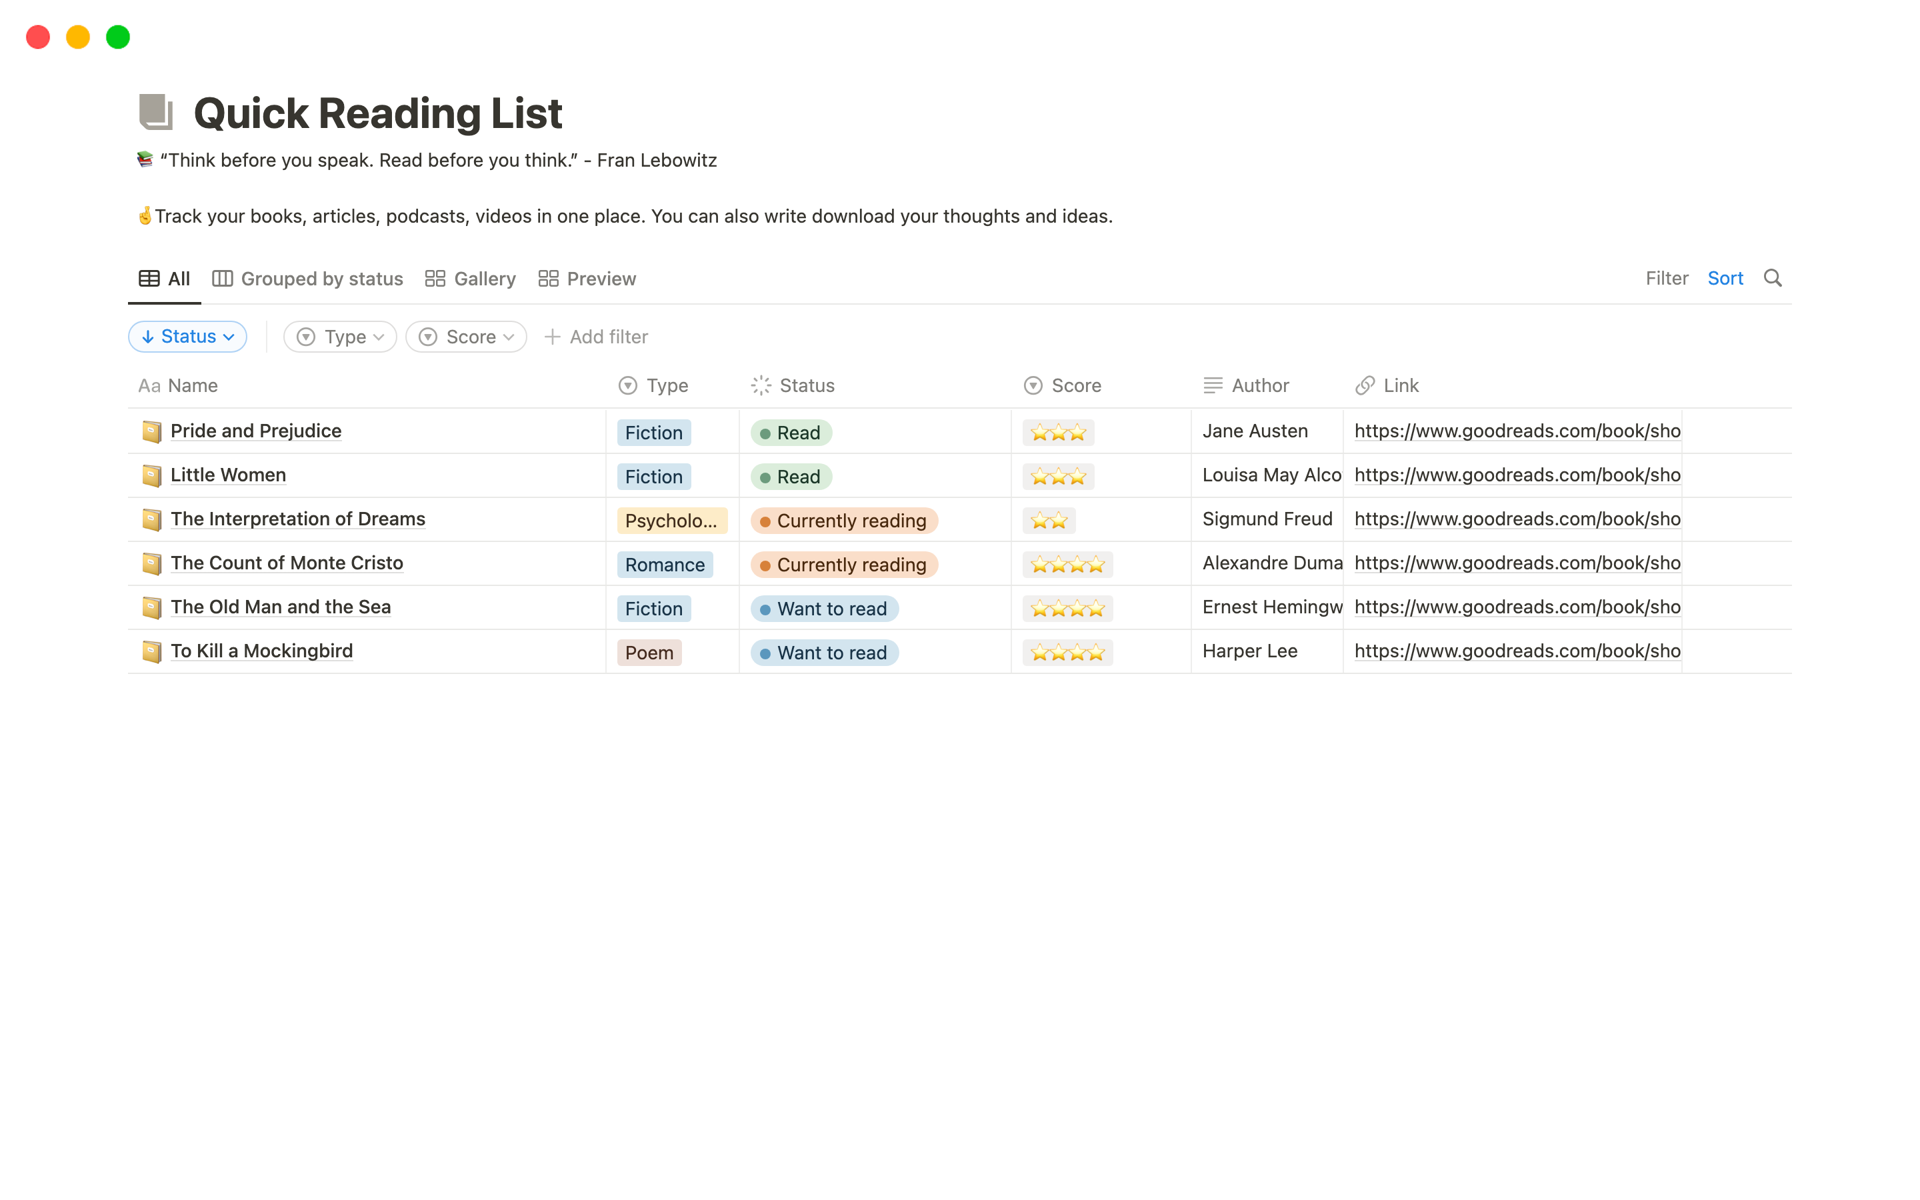 You'll get a notion template of the reading list. You can build your own library based on this.